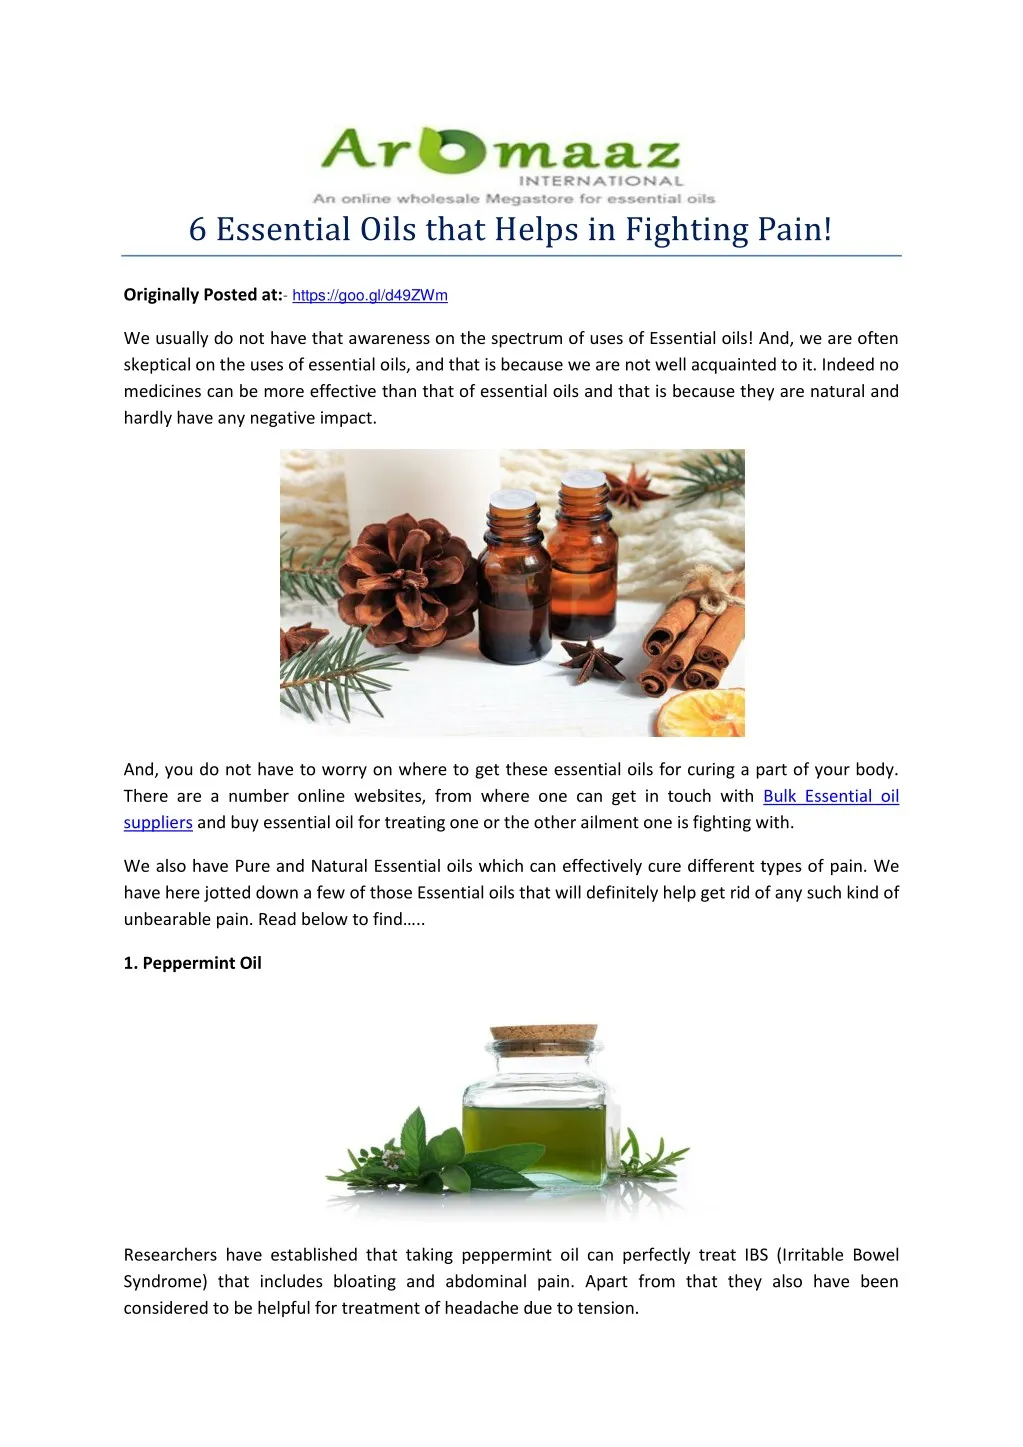 6 essential oils that helps in fighting pain